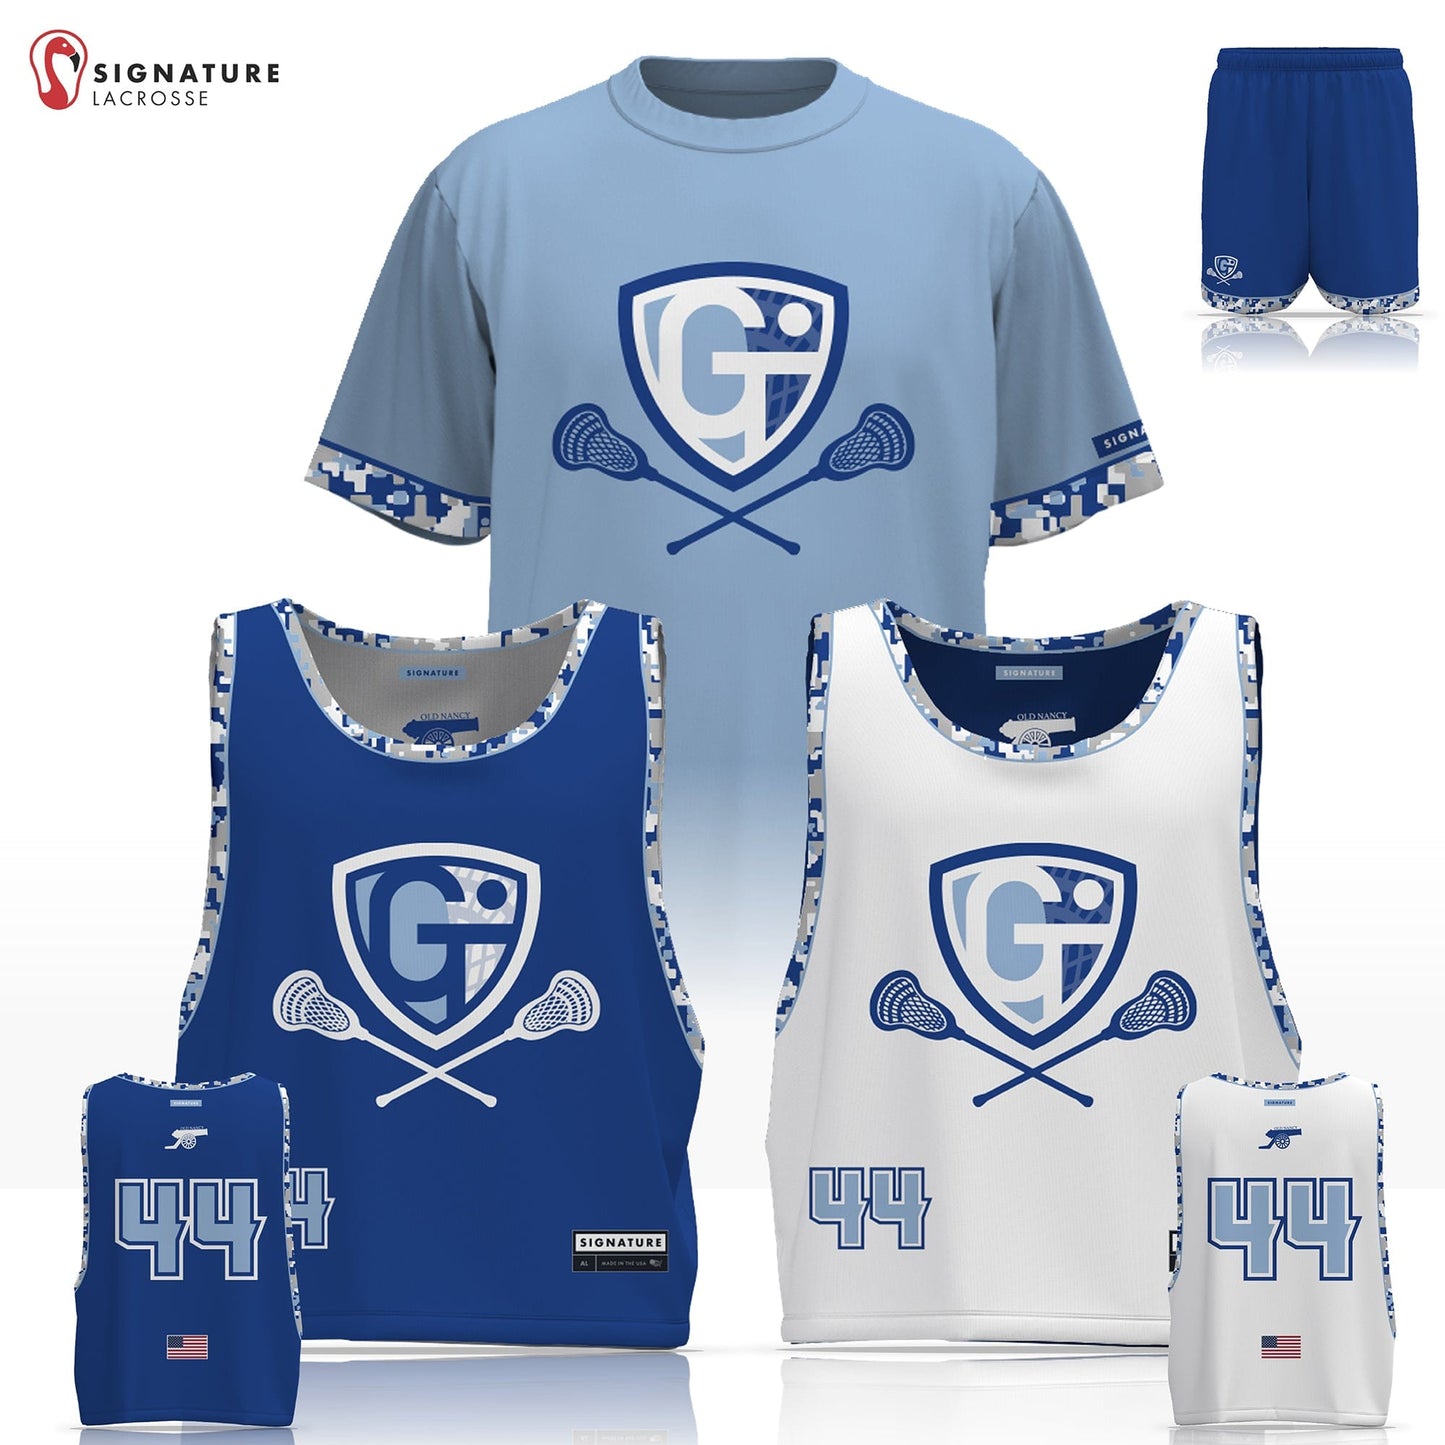 Georgetown-Triton Youth Lacrosse Men's 3 Piece Player Game Package: 5-6 Signature Lacrosse